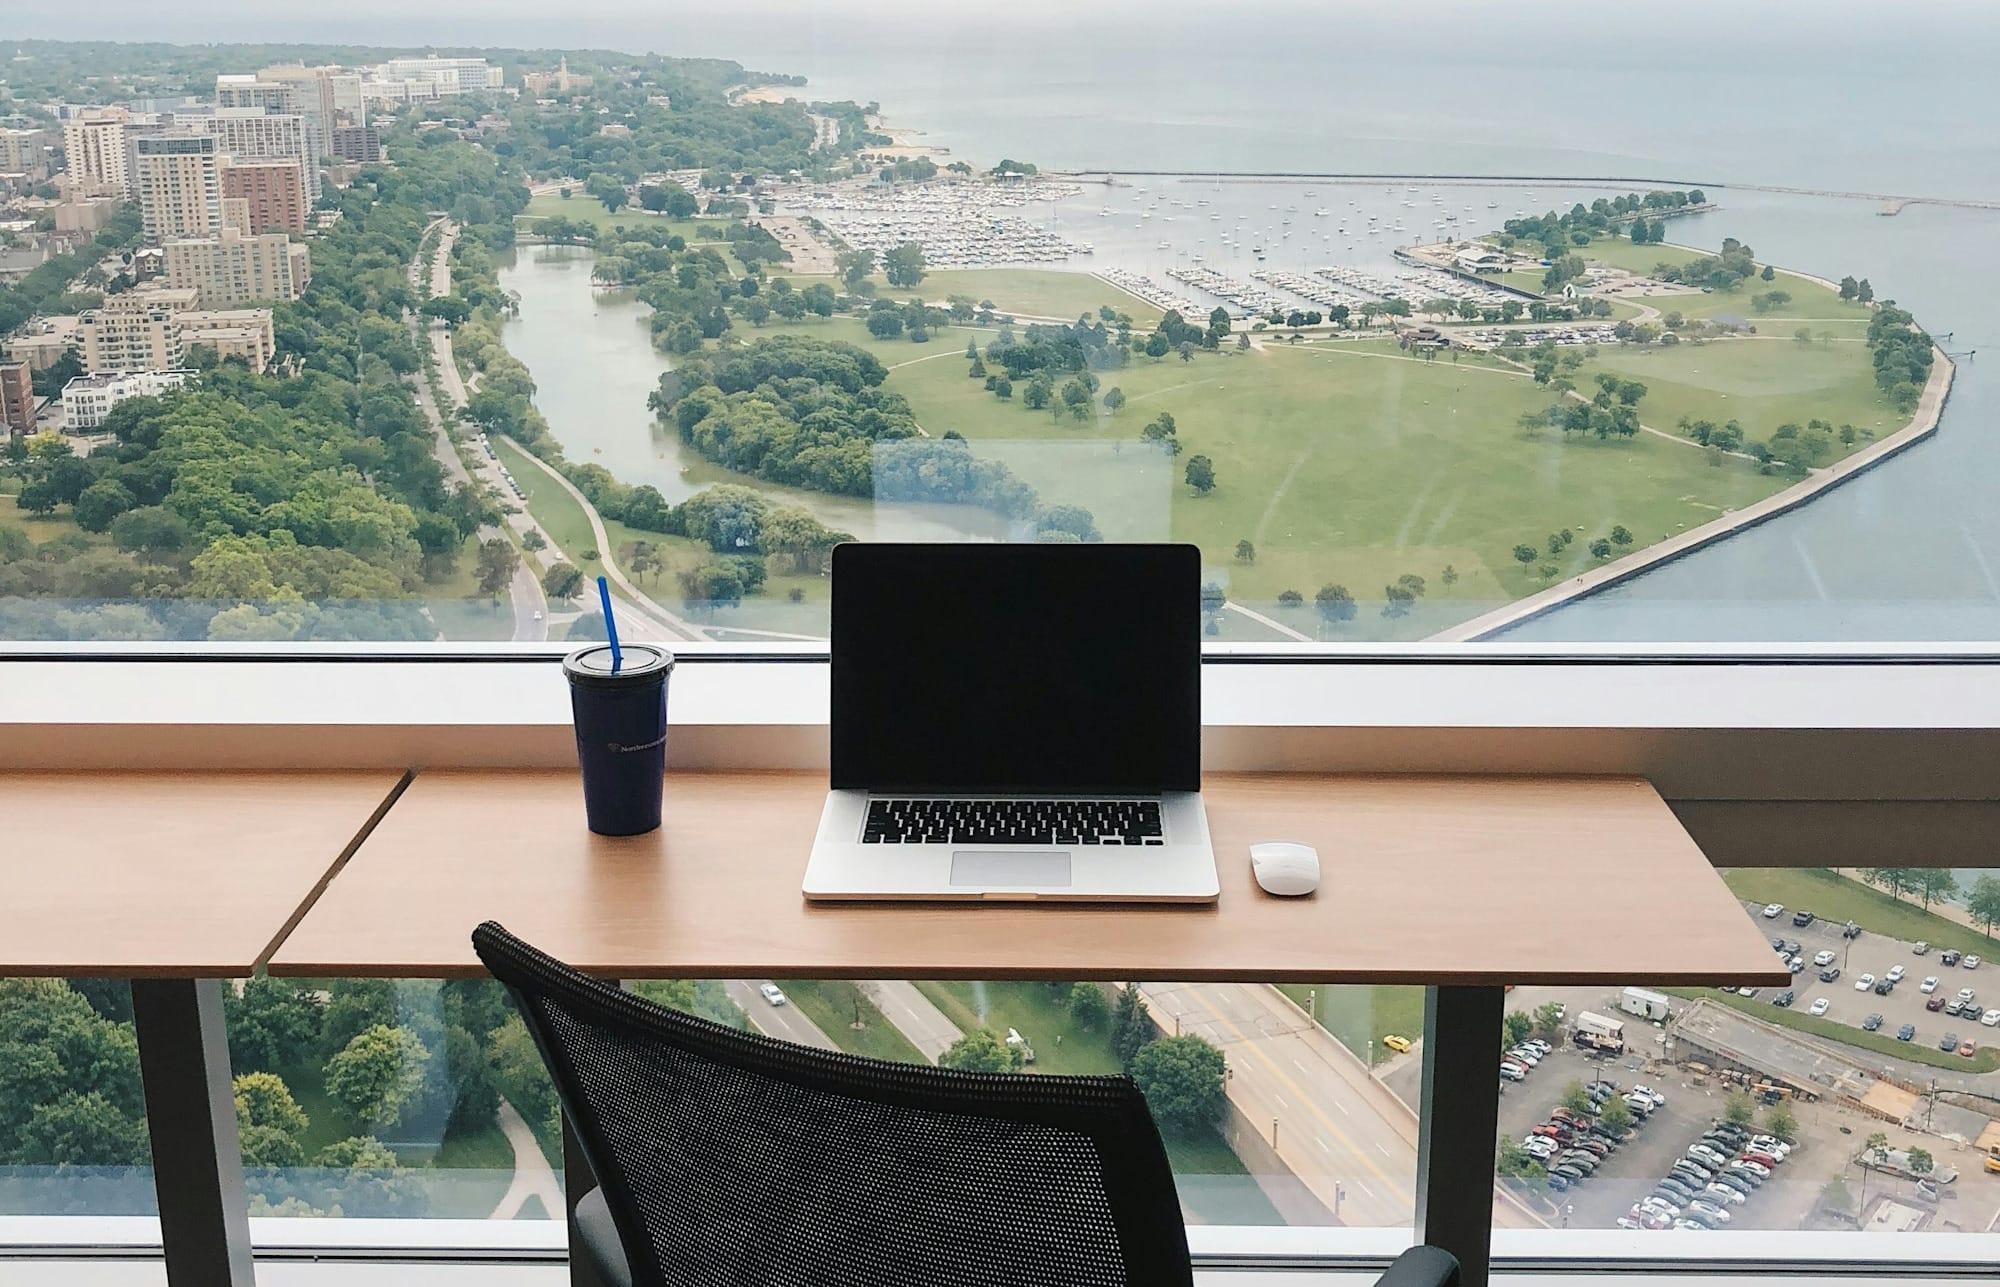 A laptop and mouse with a reusable cup and straw sitting nearby on a desk overlooking a city park as seen from a high-rise w